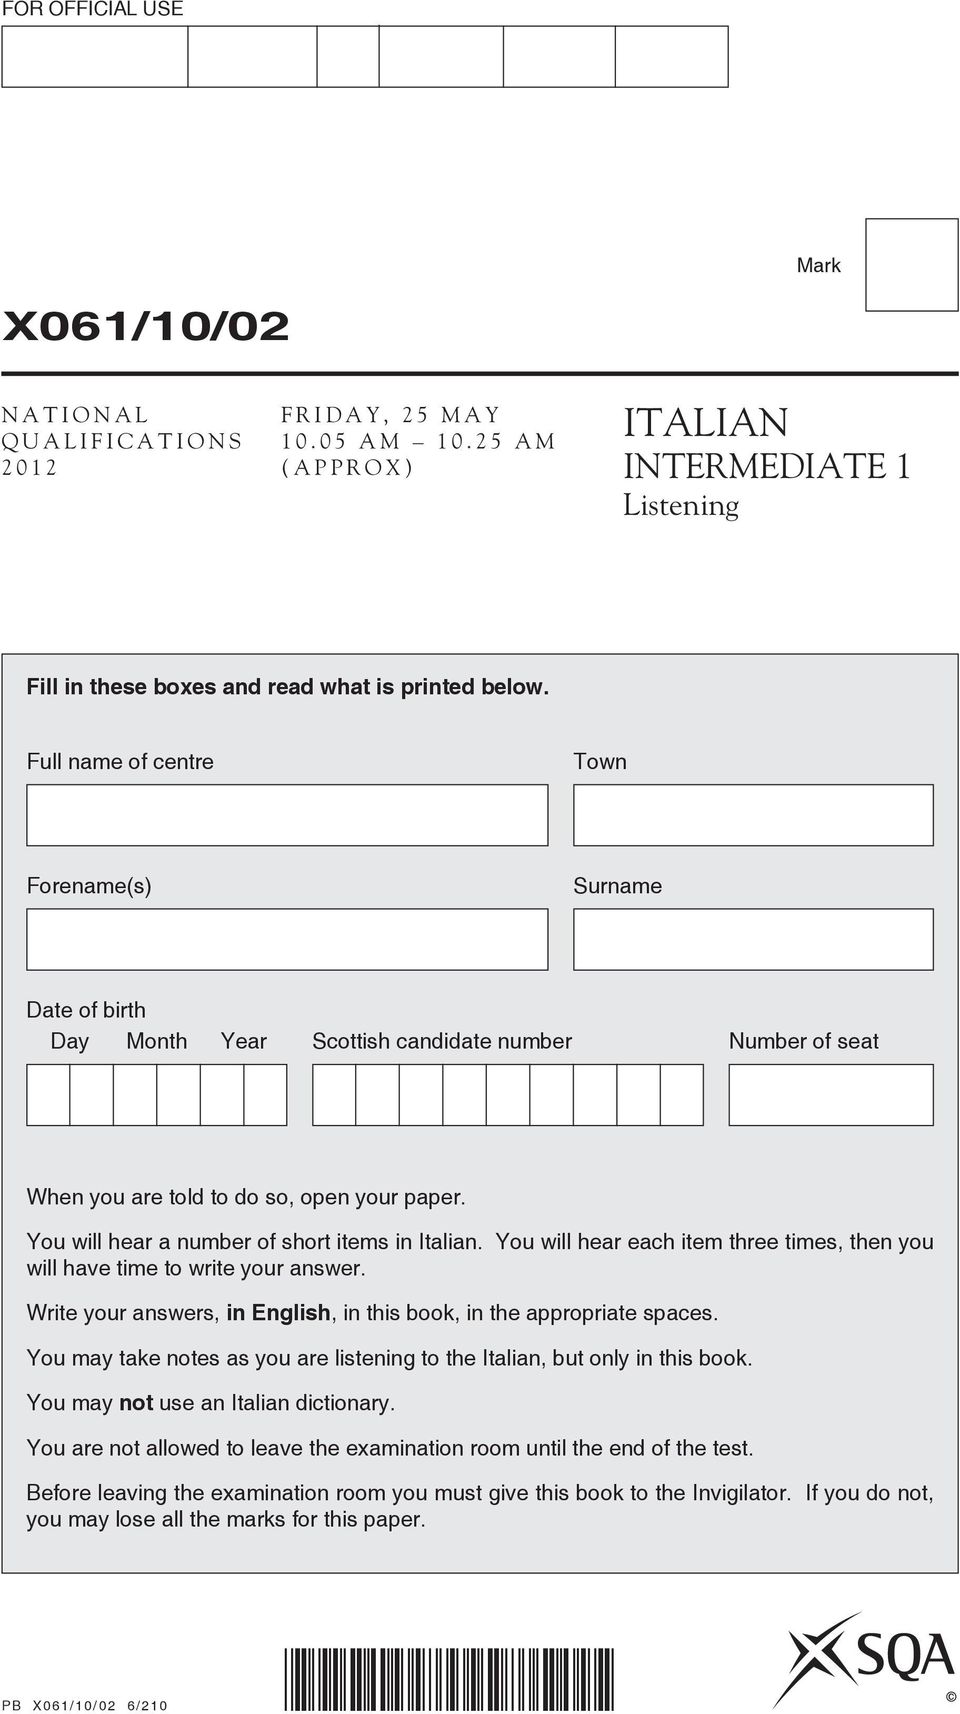 You will hear a number of short items in Italian. You will hear each item three times, then you will have time to write your answer.